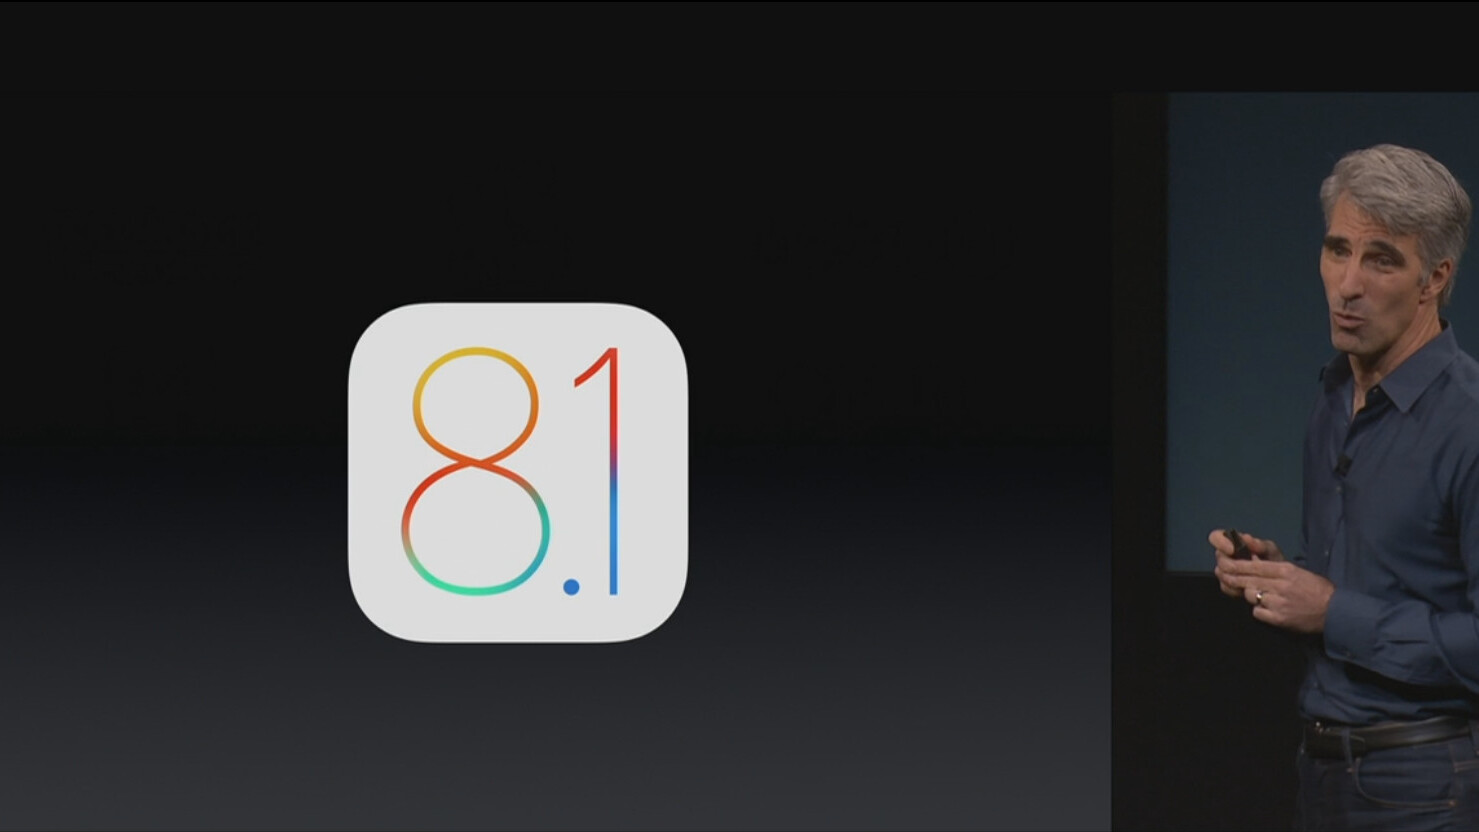 Apple is bringing back the beloved Camera Roll with iOS 8.1, out next week